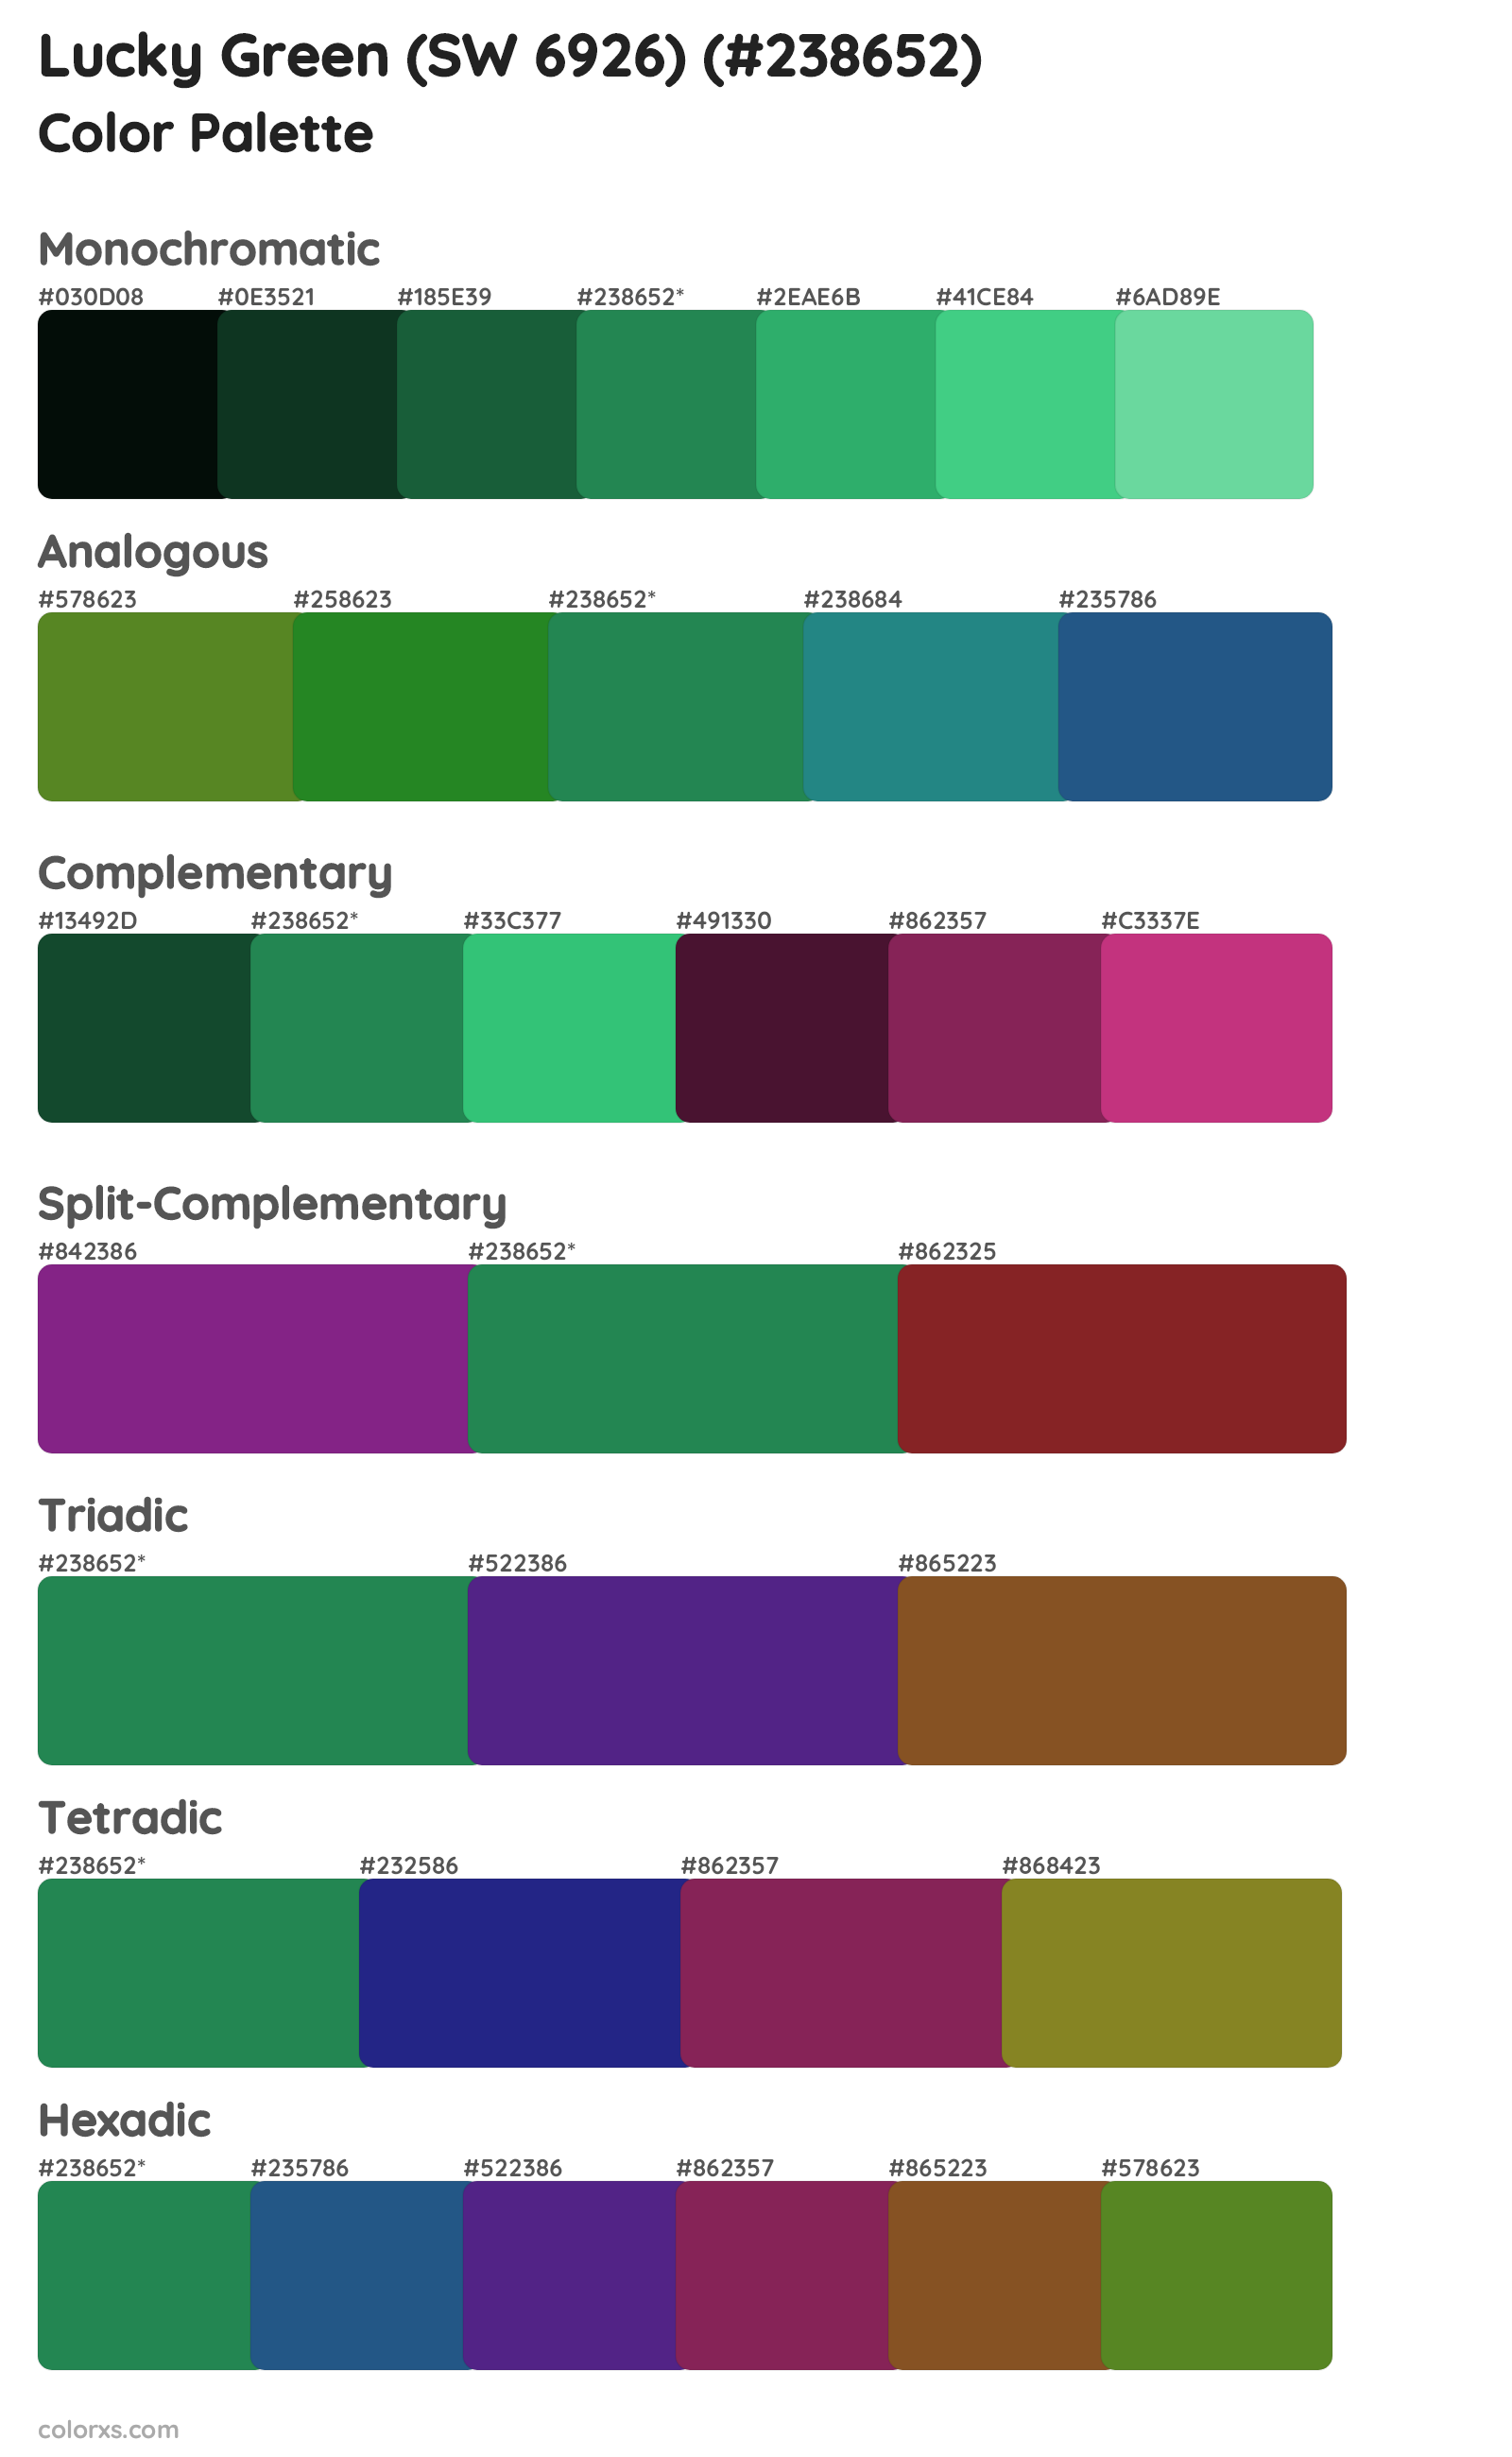 Lucky Green (SW 6926) Color Scheme Palettes